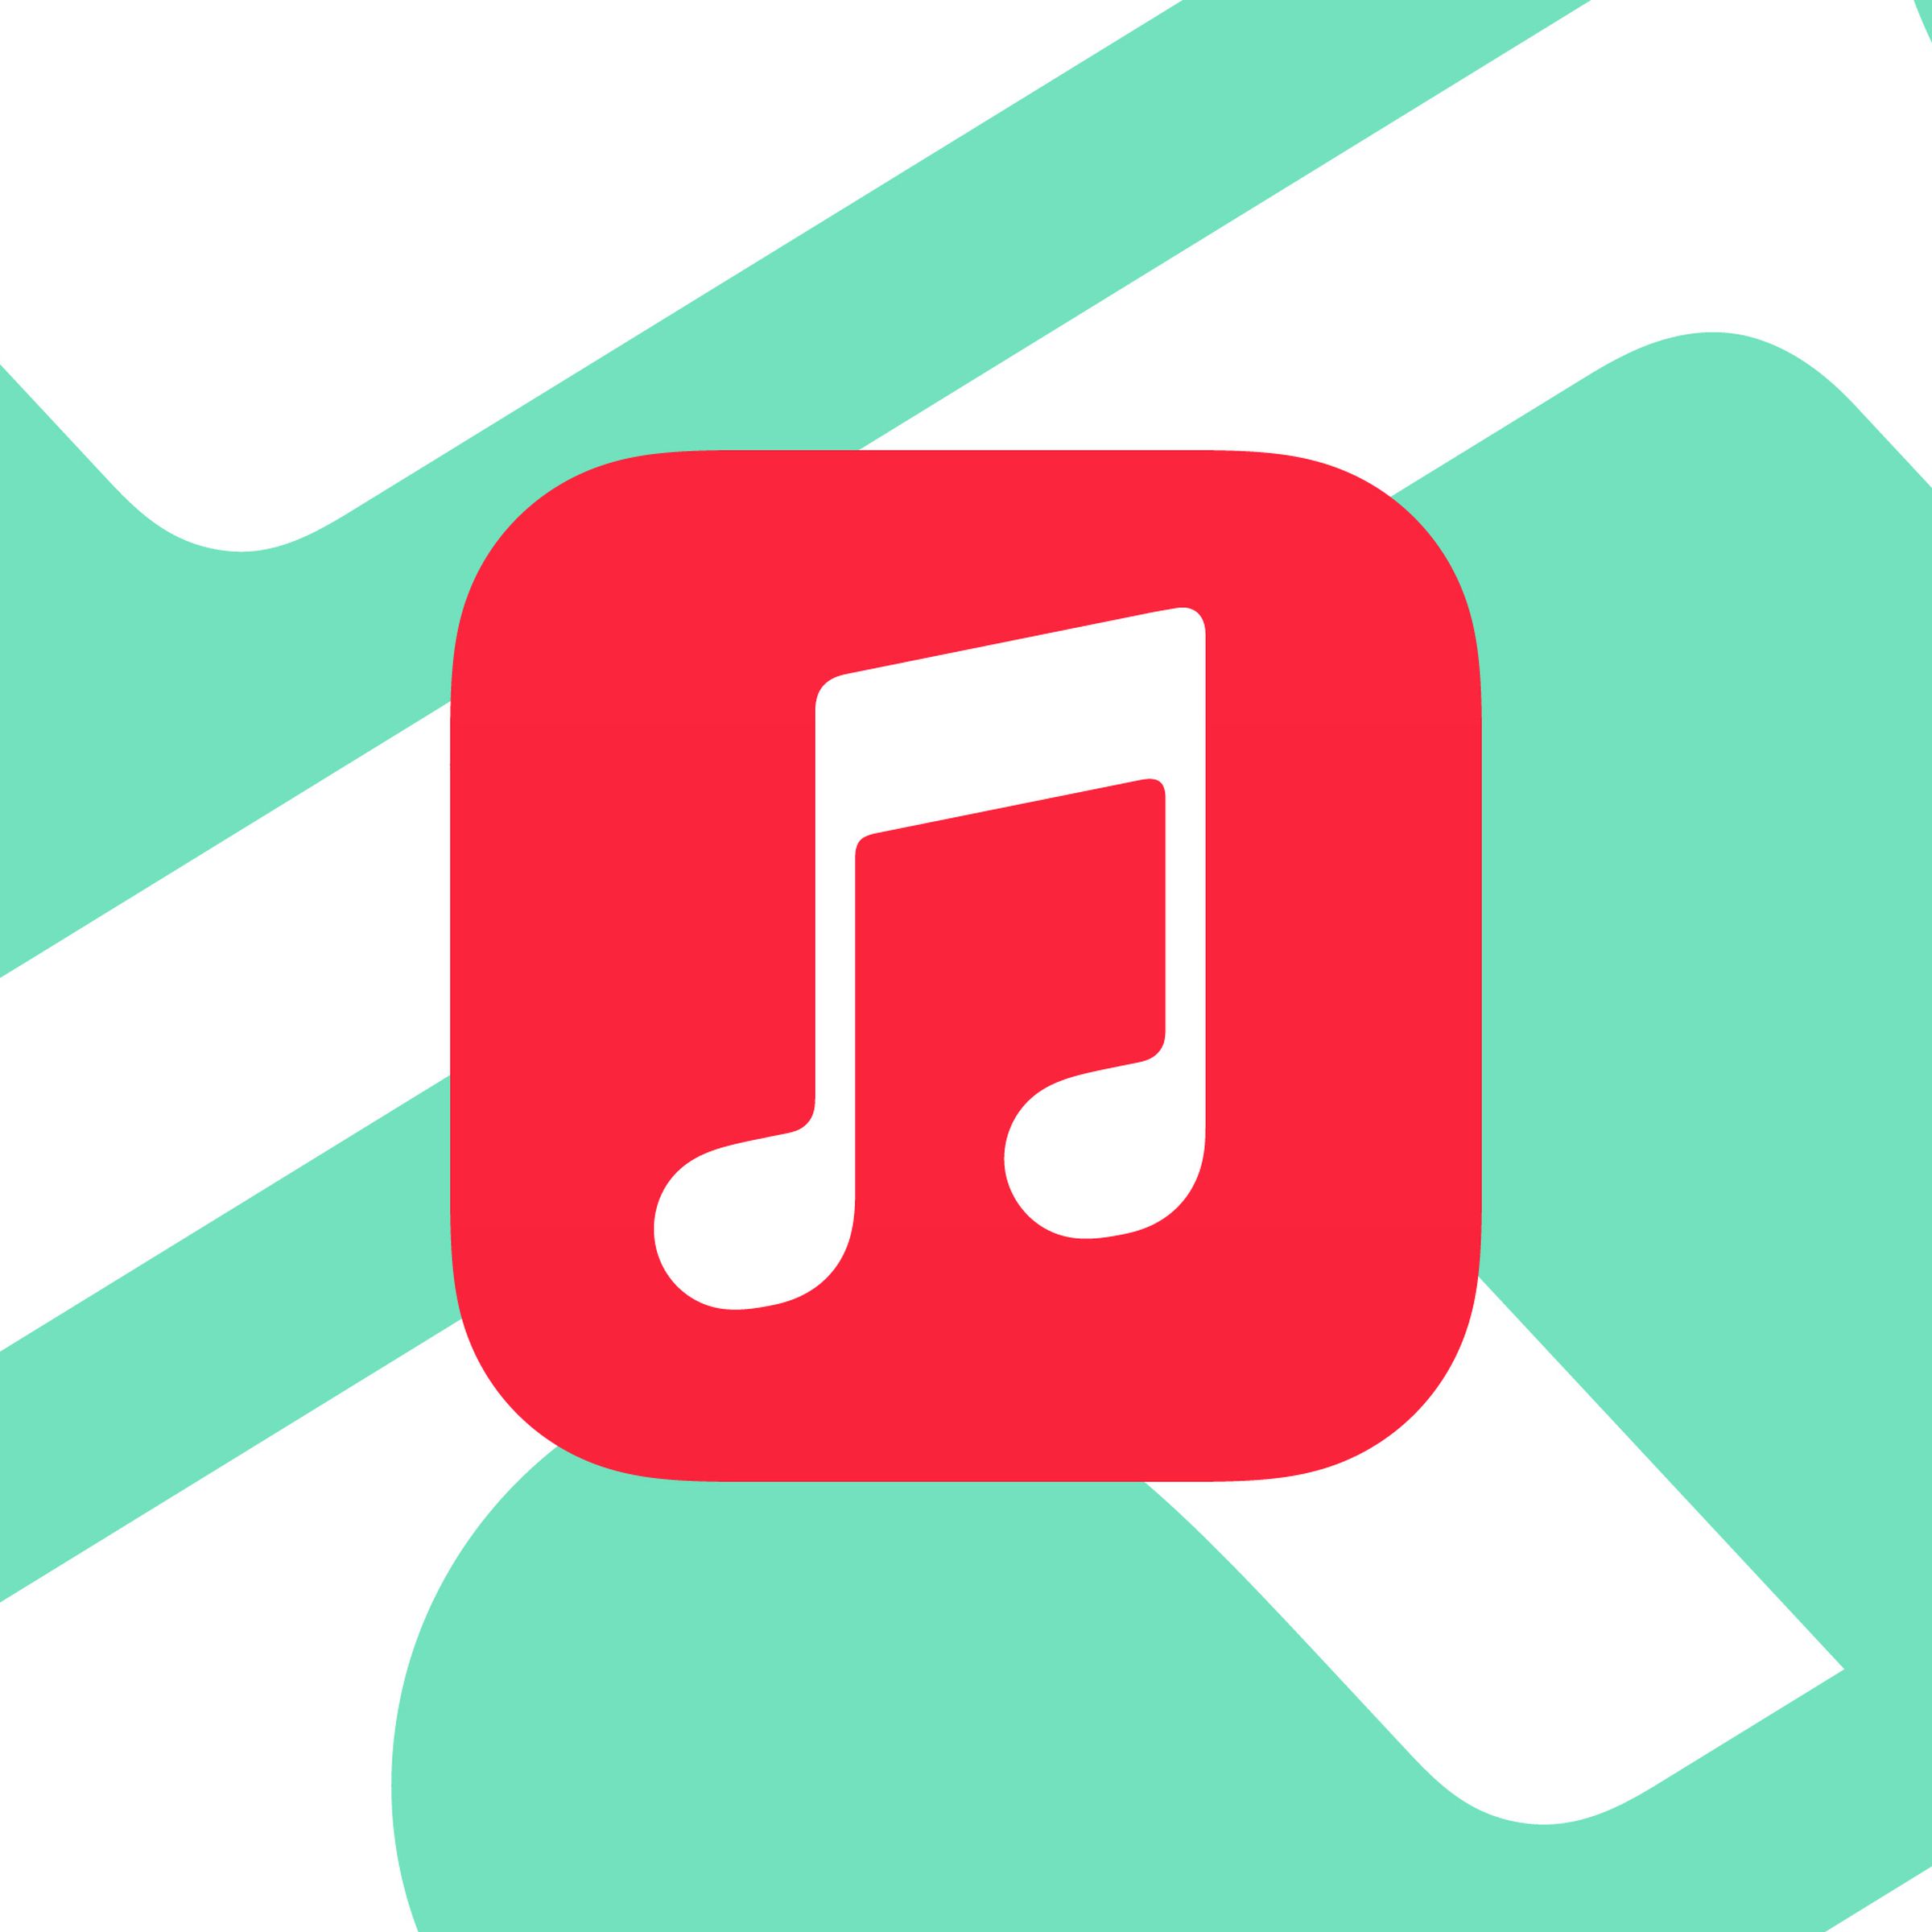 The Apple Music iOS logo on a green and white background.